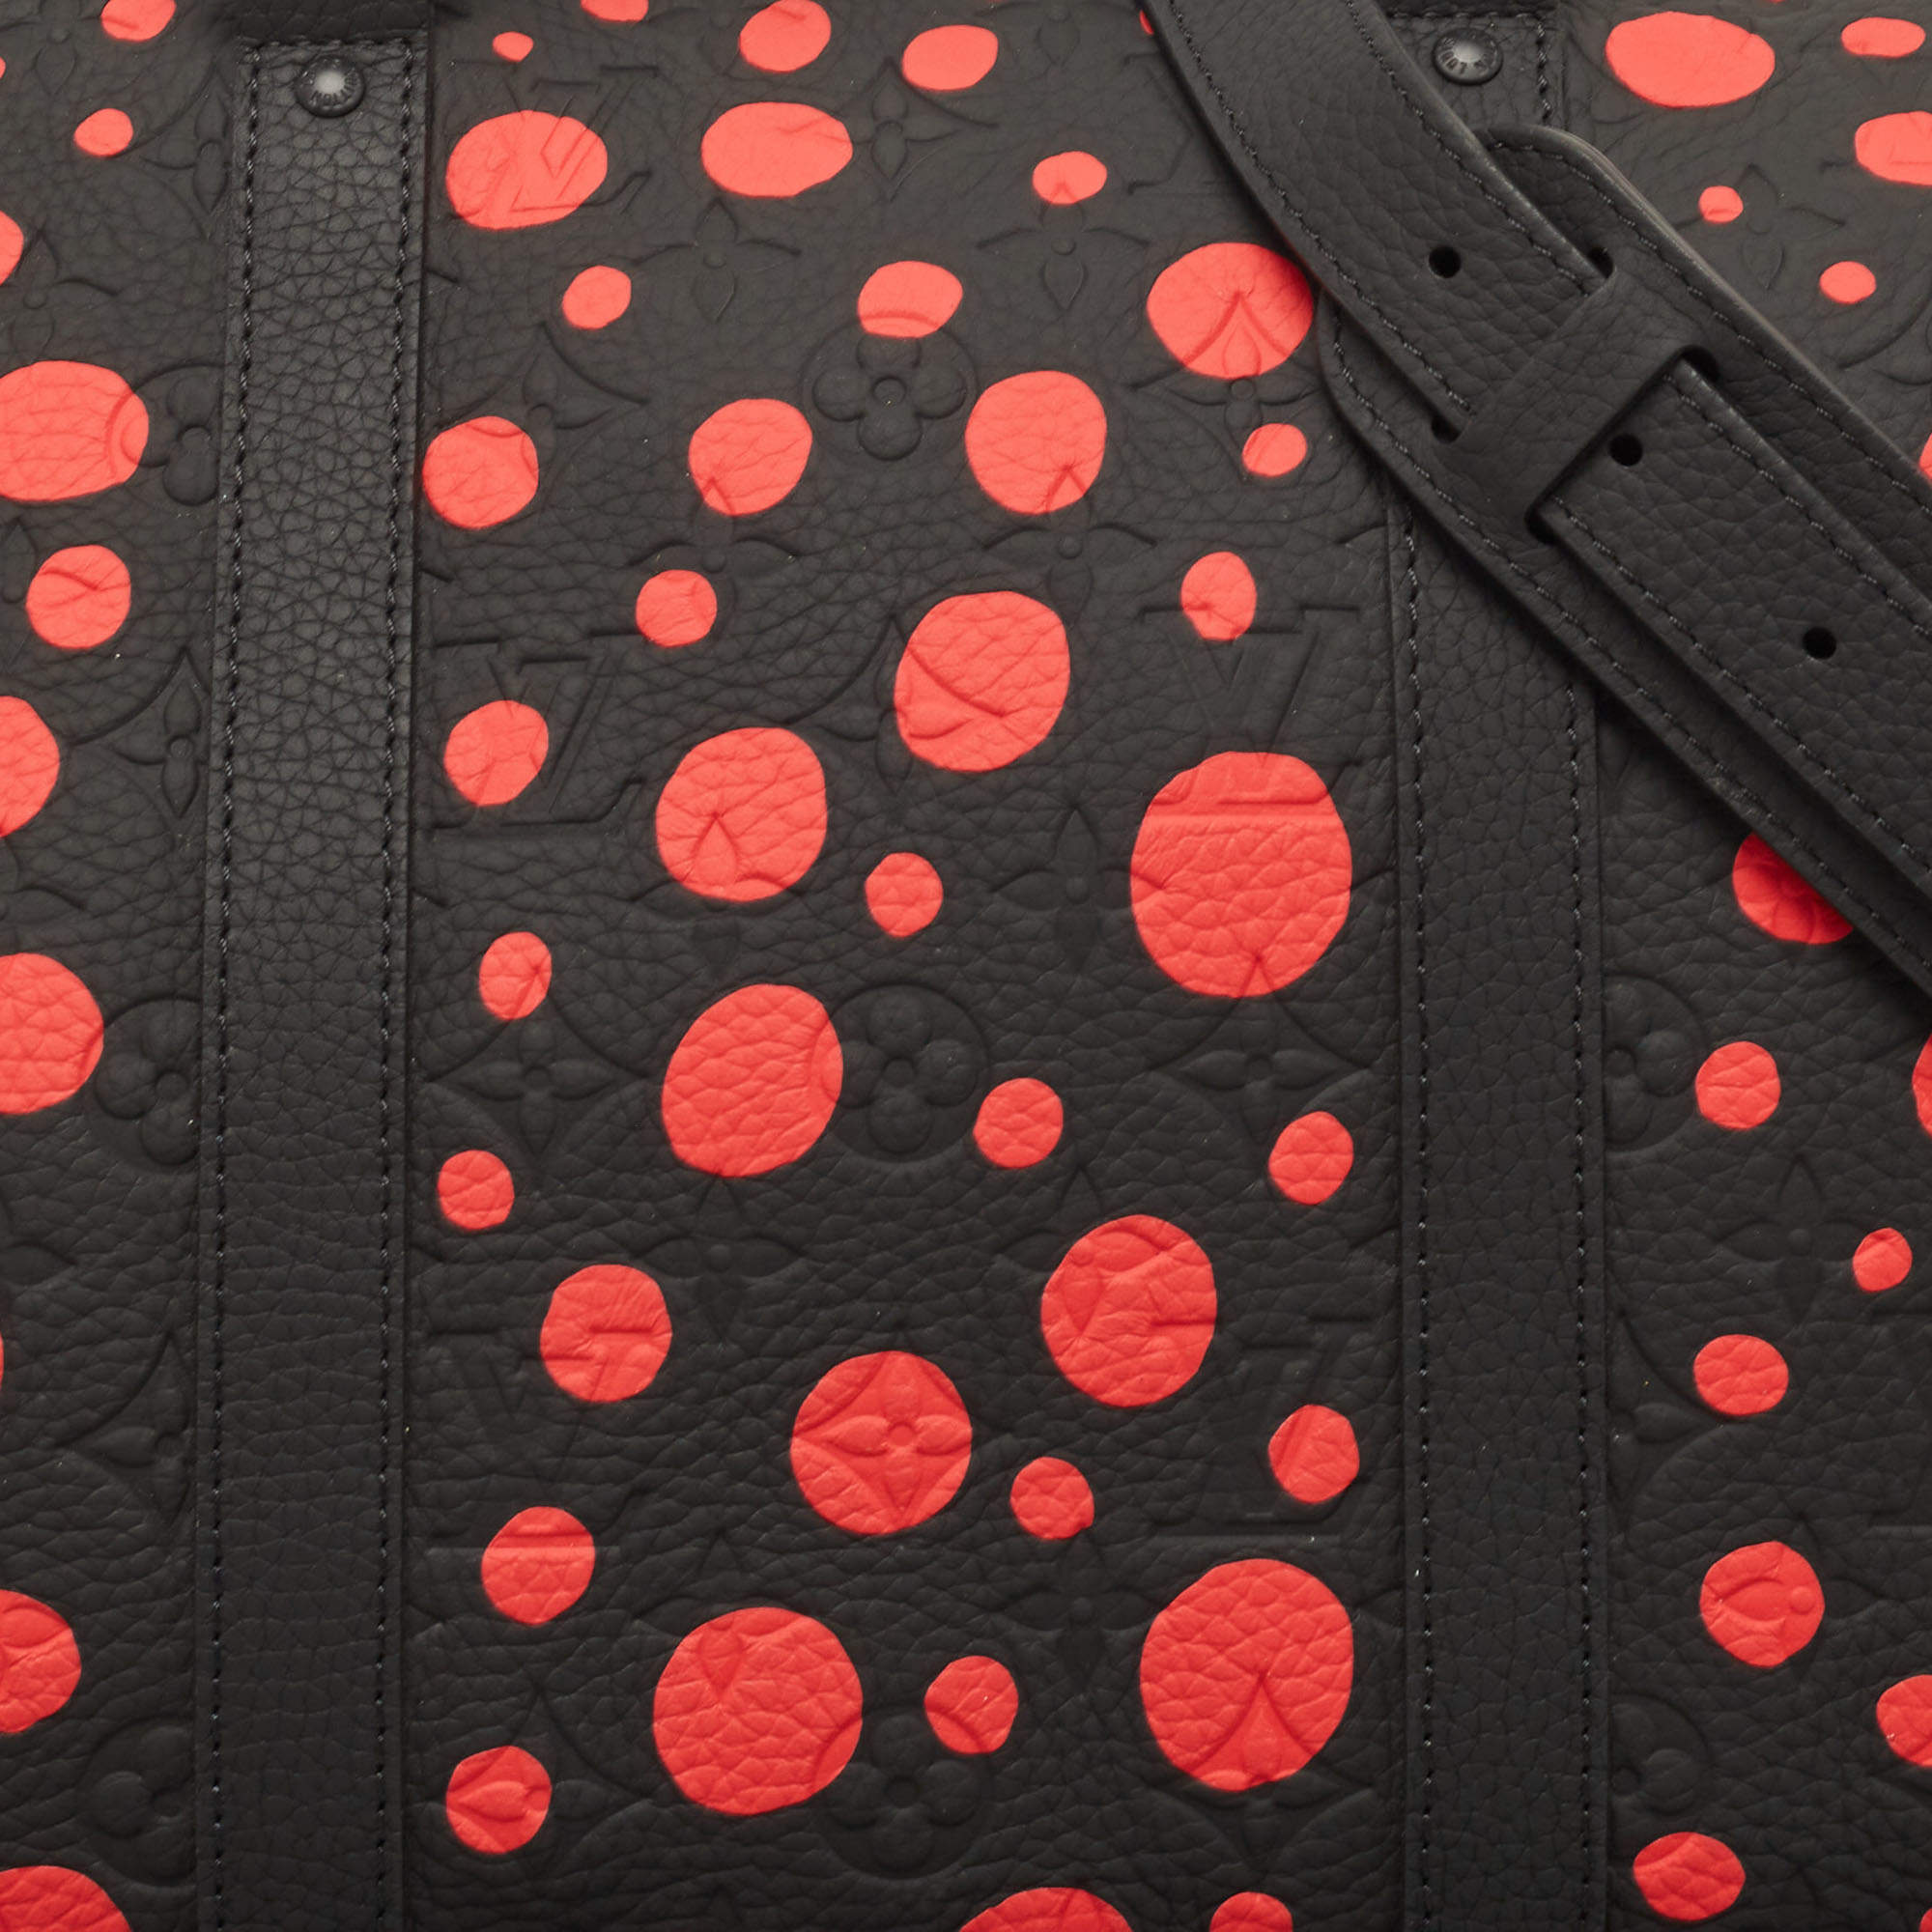 Louis Vuitton x Yayoi Kusama Keepall 50 Black/Red in Taurillon Cowhide  Leather with Black-tone - US